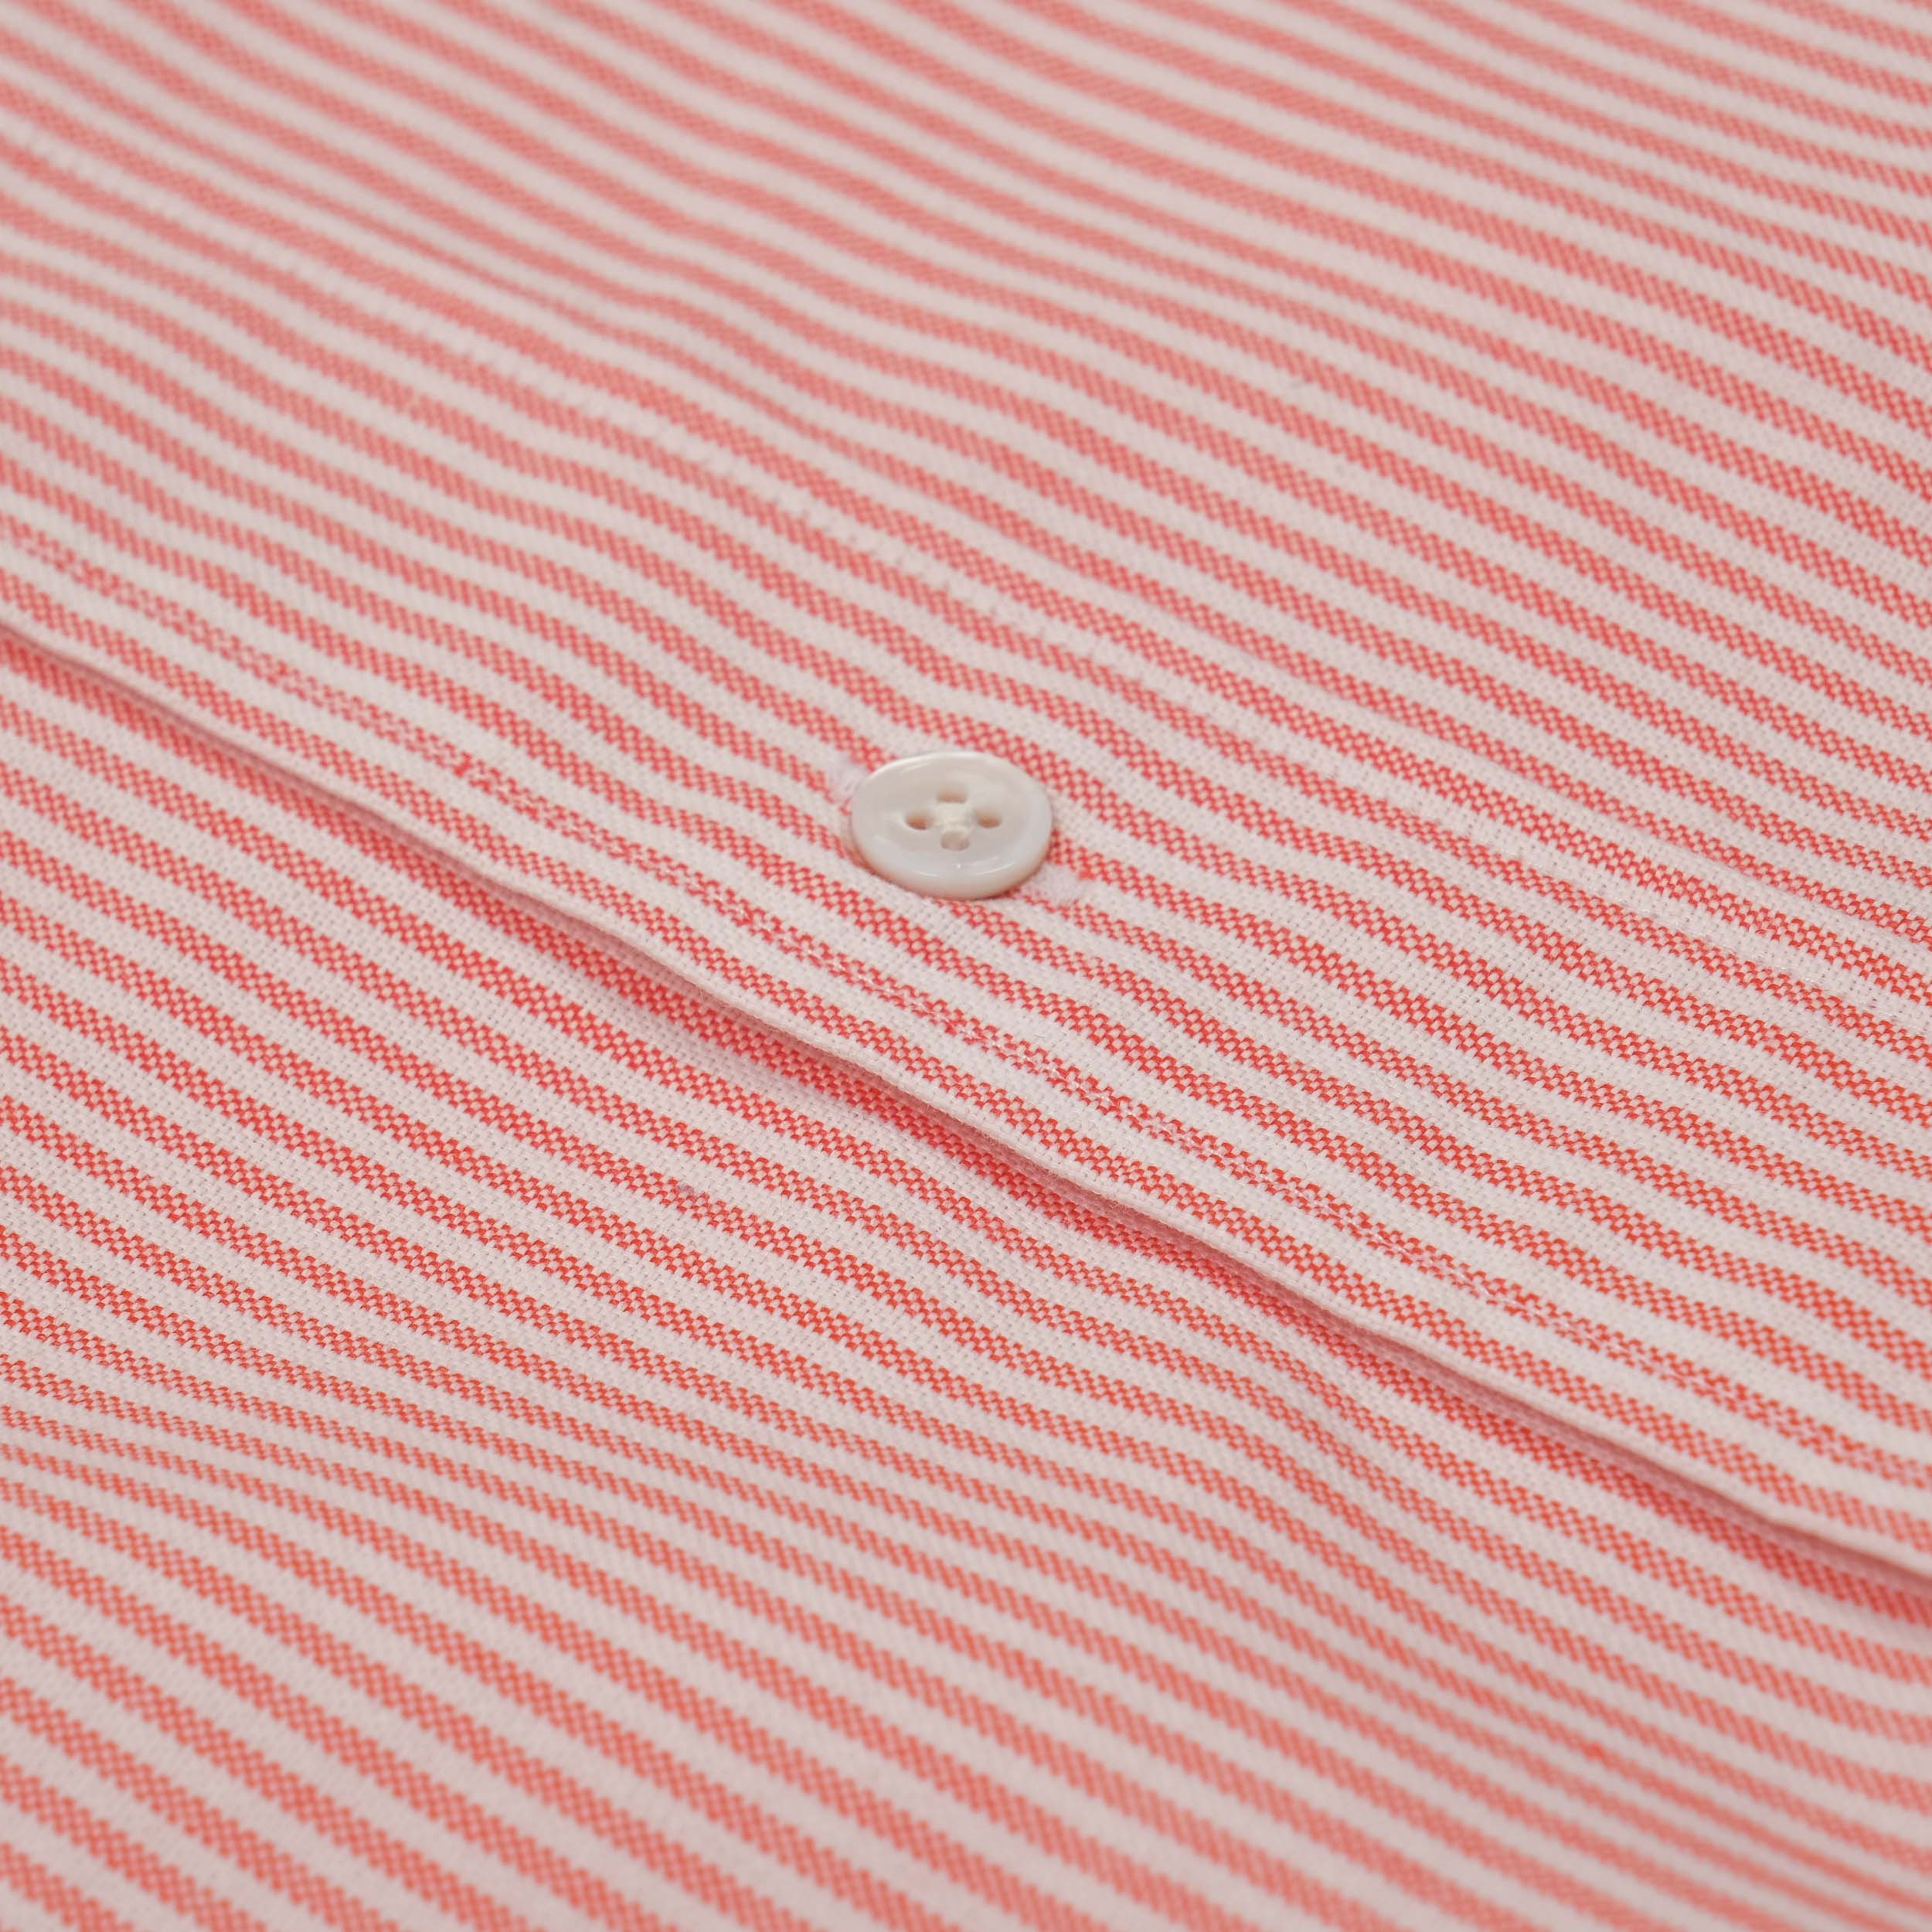 PREPPY STRIPED SHIRT - RED - BRUT Clothing